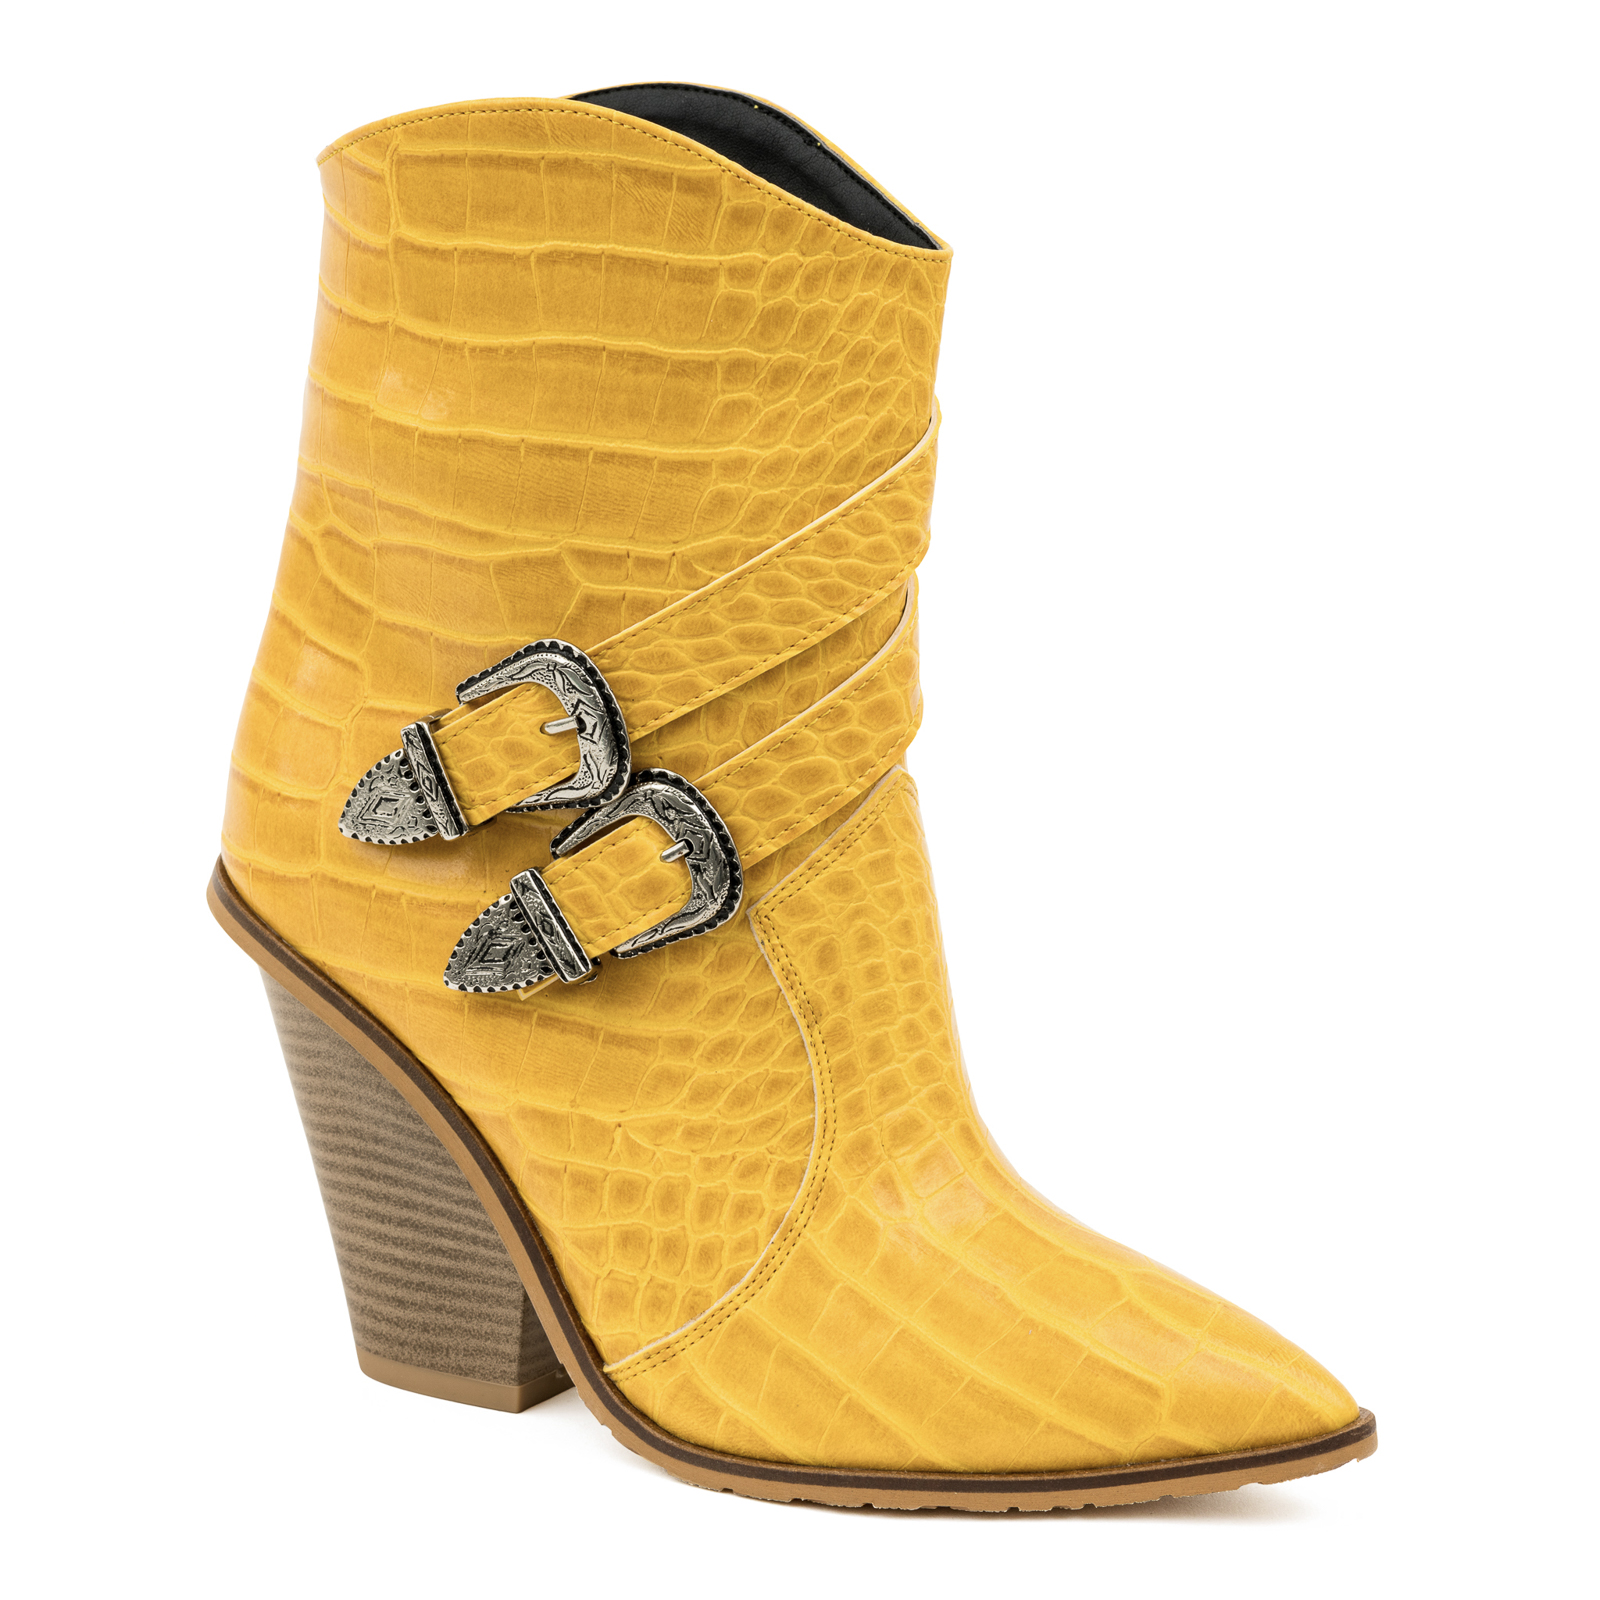 CROC POINTED COWGIRL BOOTS WITH BLOCK HEEL - YELLOW